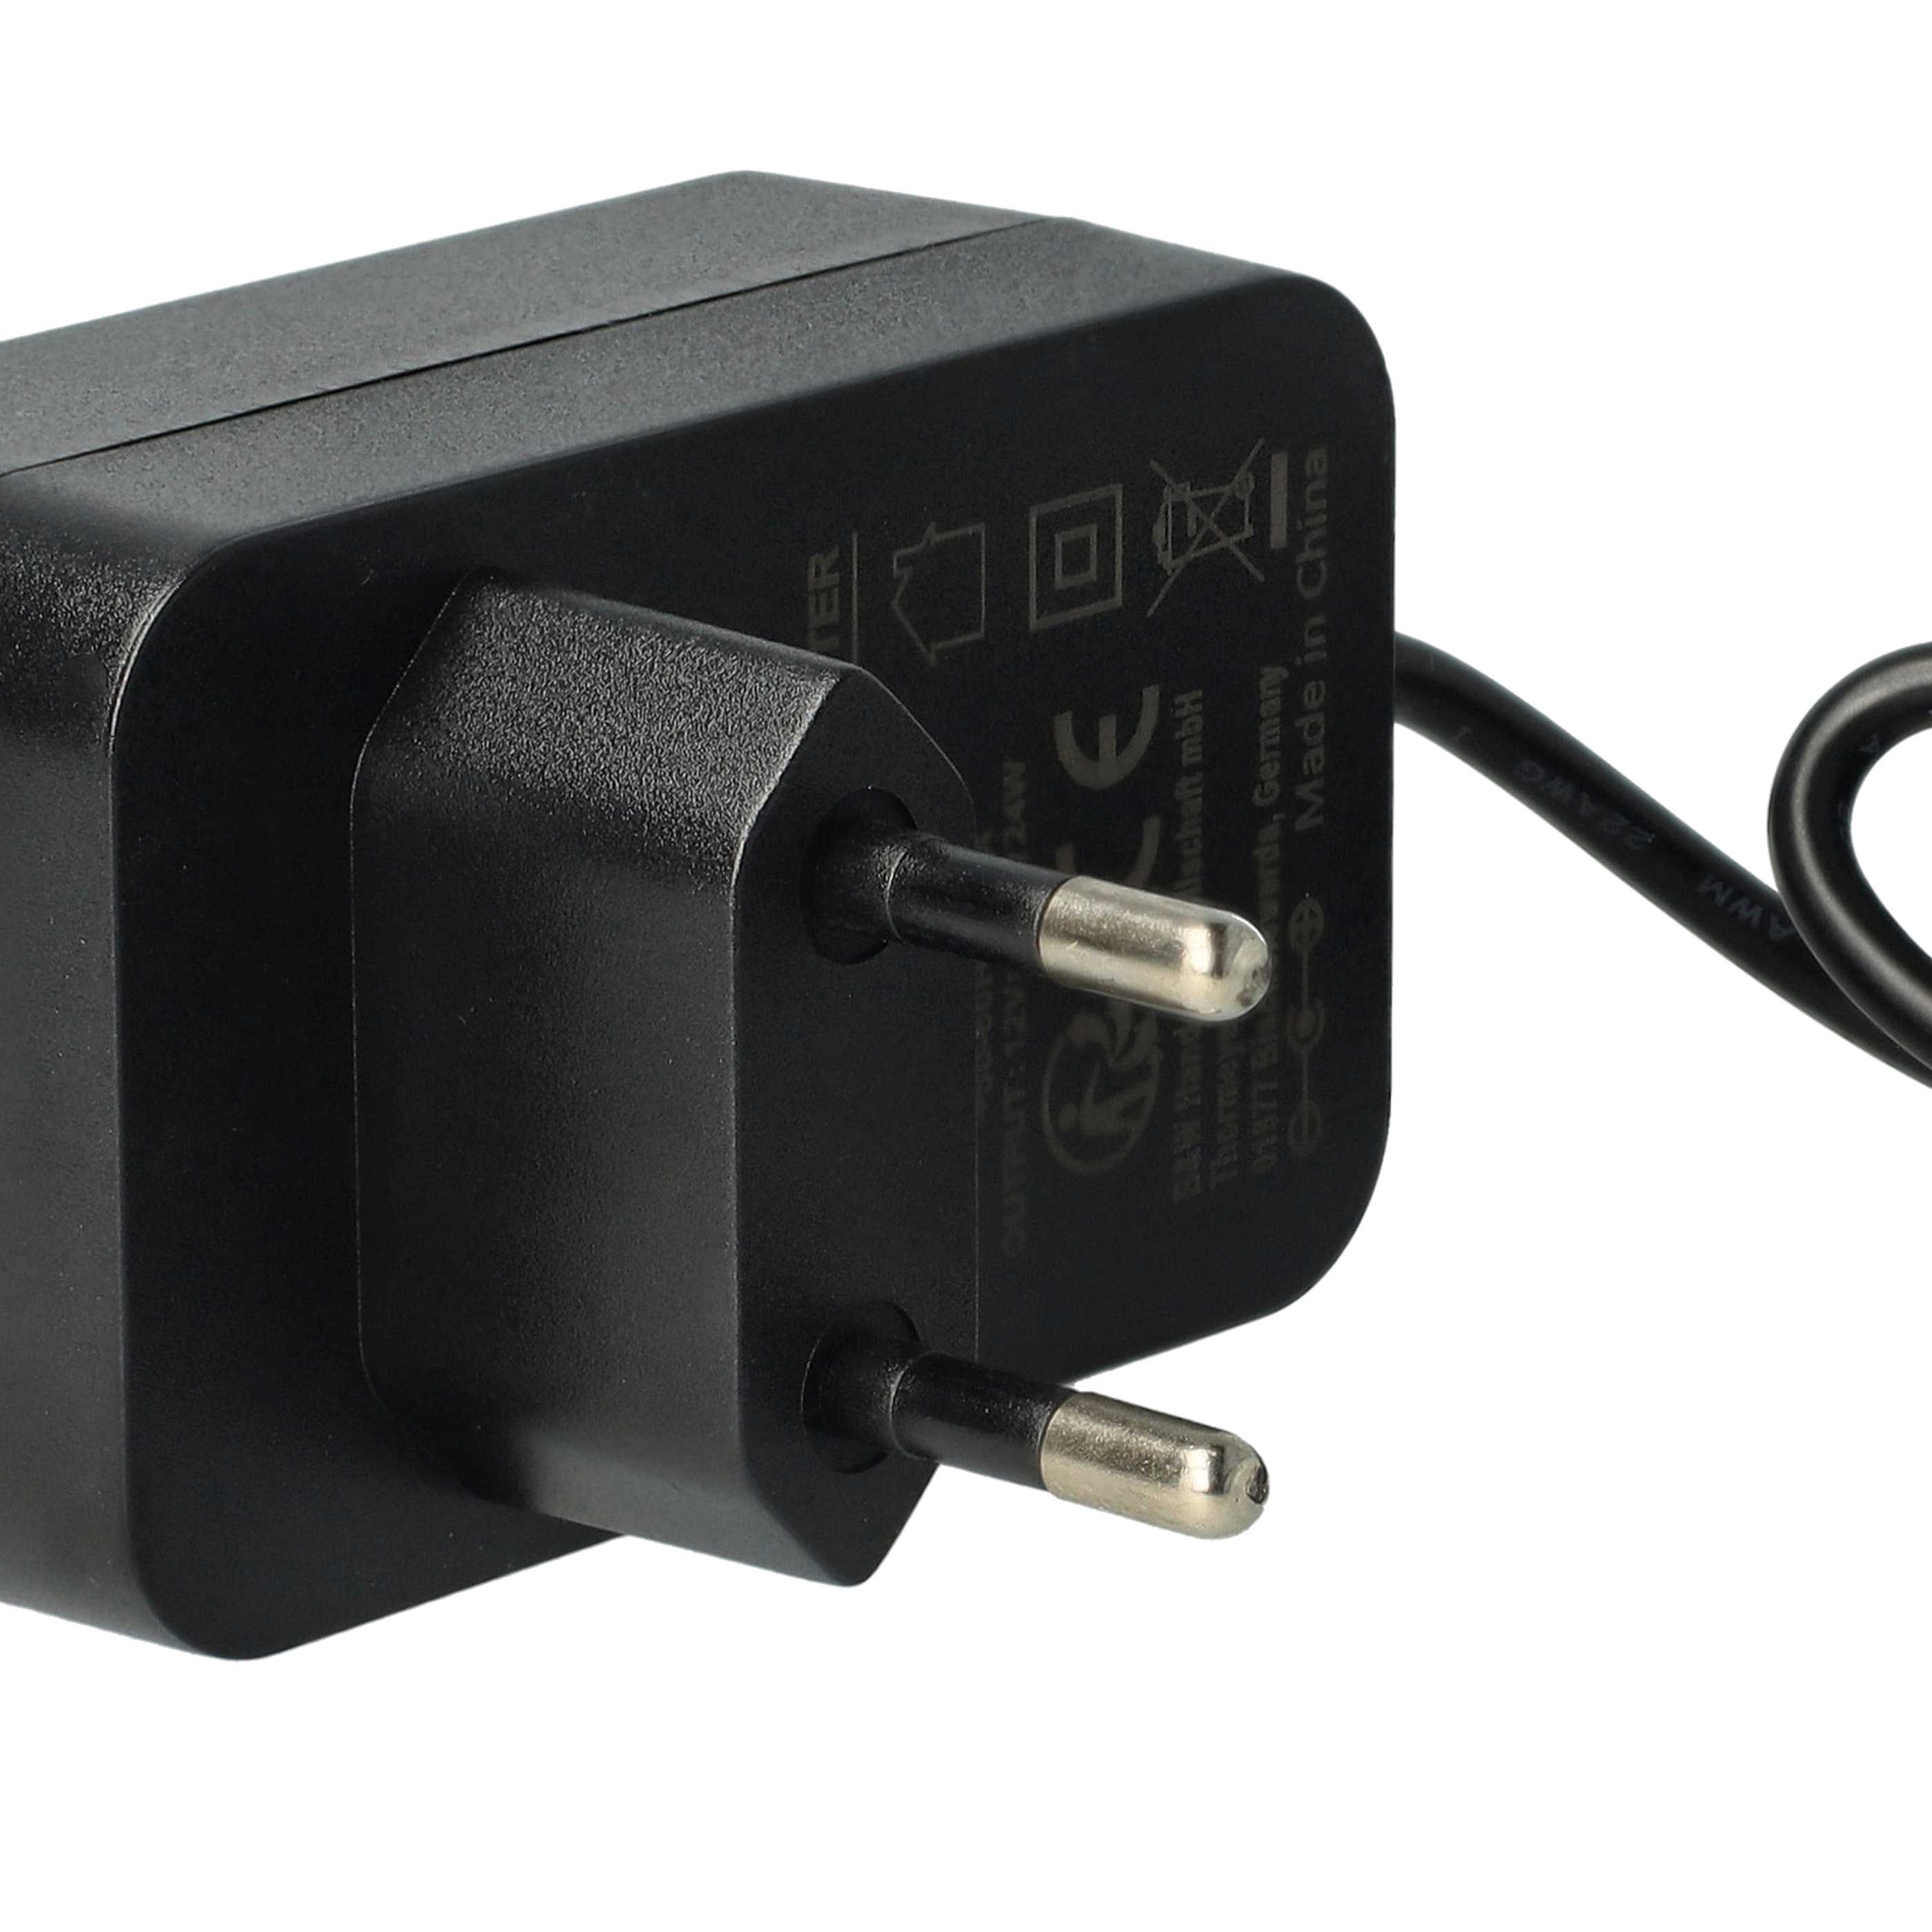 Mains Power Adapter suitable for 900TVL HD CCTV Annke Home Security Camera, Wall Mounted Security Camera etc. 